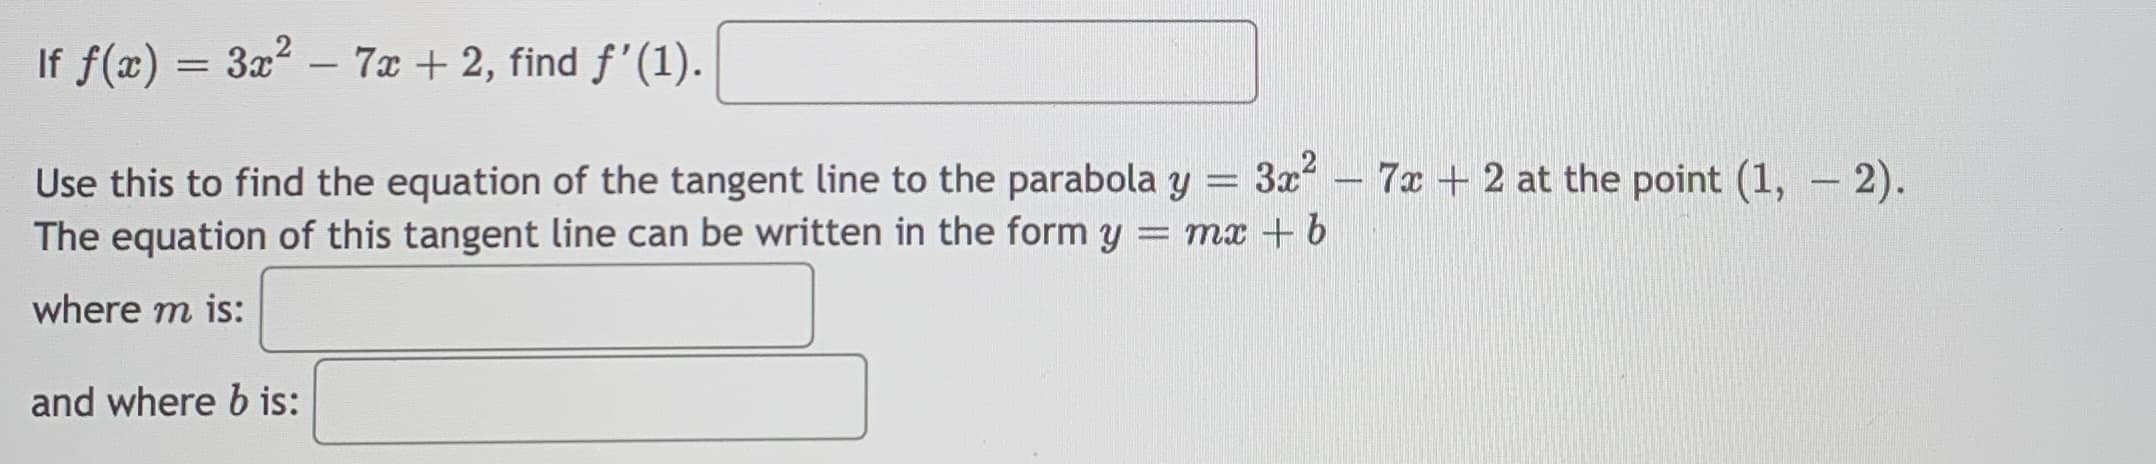 If f(x) = 3x² – 7x + 2, find f'(1).
3x – 7x + 2 at the point (1, – 2).
Use this to find the equation of the tangent line to the parabola y =
The equation of this tangent line can be written in the form y = mx + b
where m is:
and where b is:
